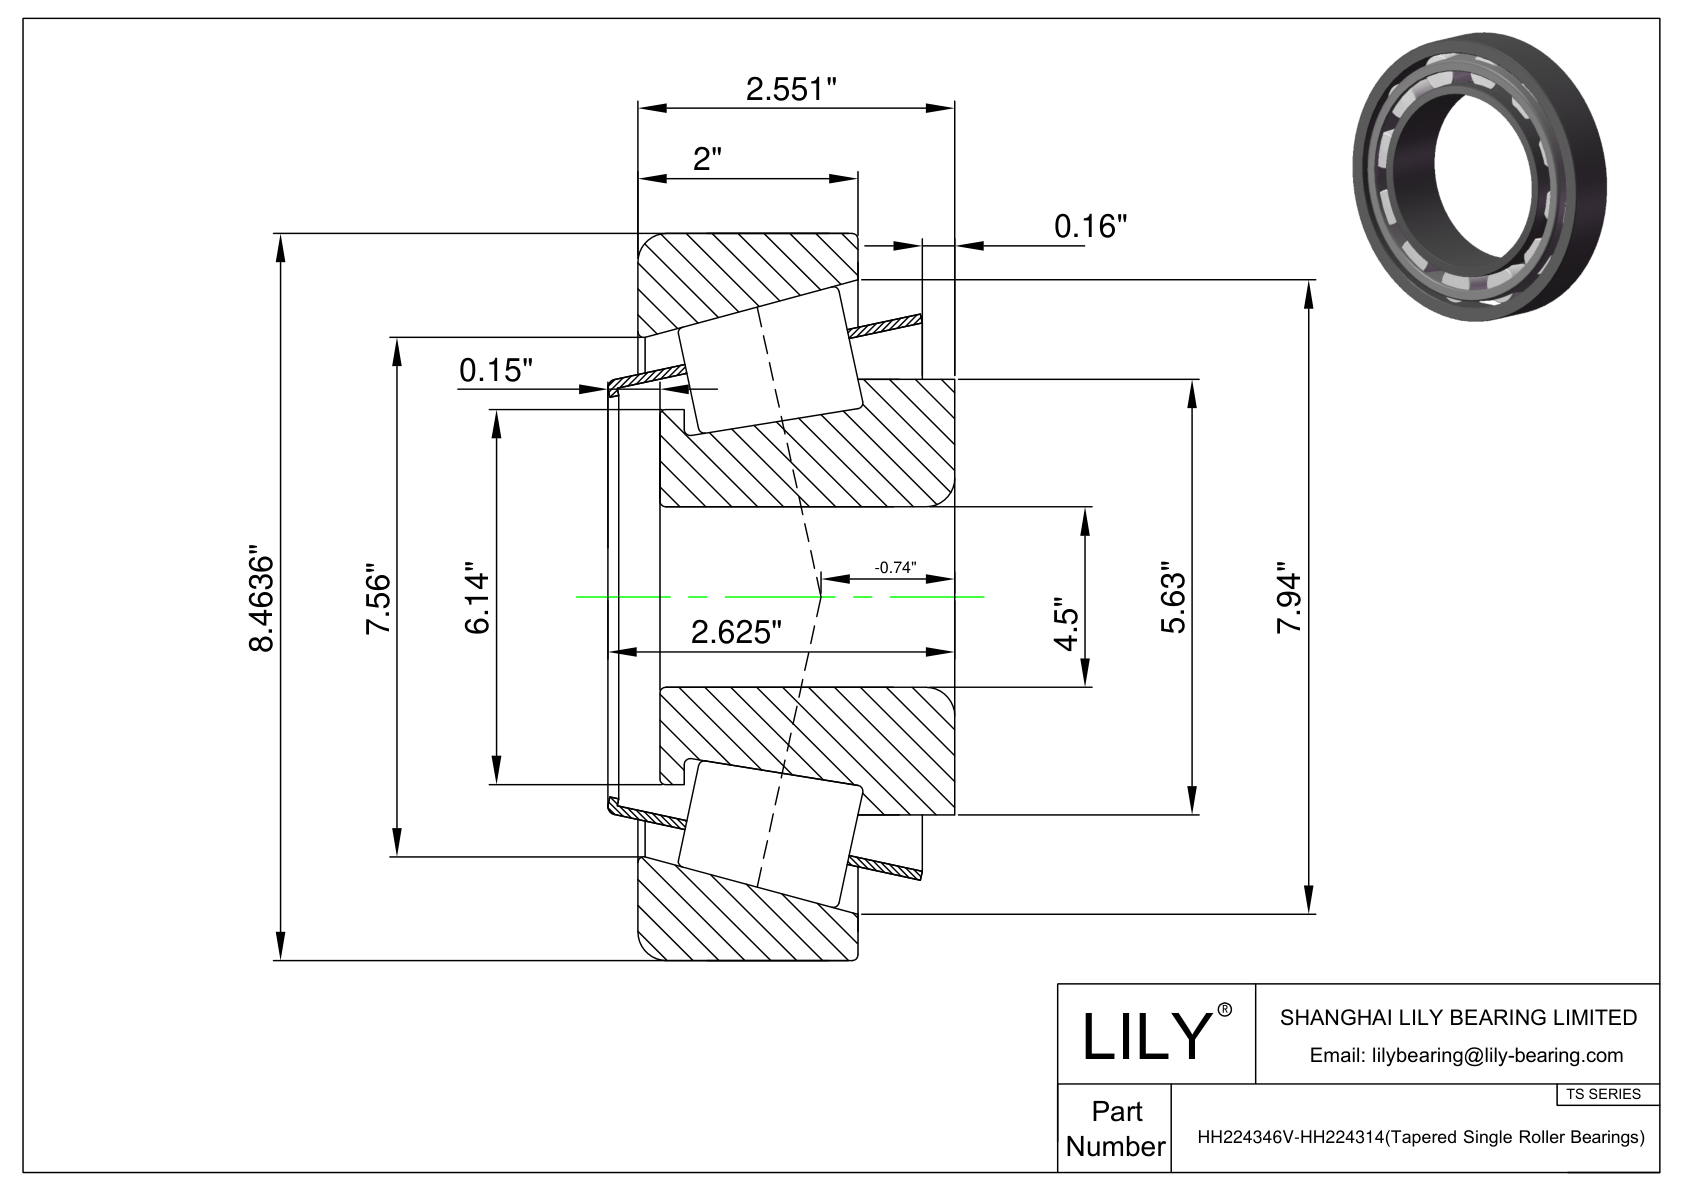 HH224346V-HH224314 TS (Tapered Single Roller Bearings) (Imperial) cad drawing